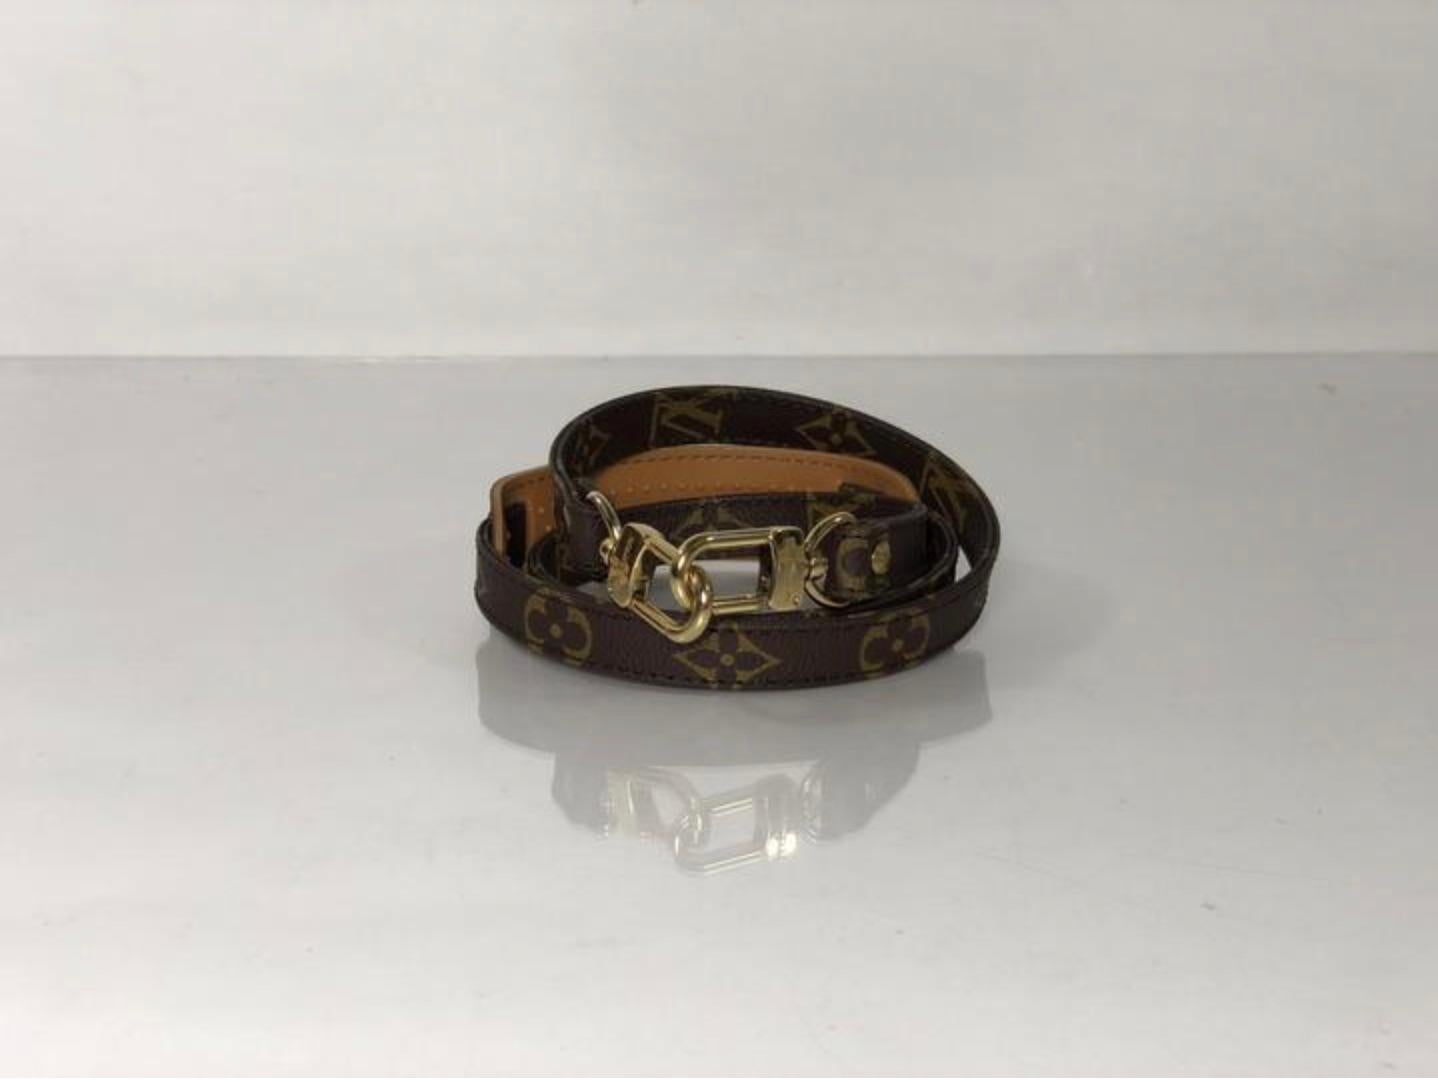 MODEL - Louis Vuitton Monogram Strap - Shoulder

CONDITION - Looks New! No signs of wear.

SKU - 2520

ORIGINAL RETAIL PRICE - 475 + tax

DATE/SERIAL CODE - NA

ORIGIN - France

PRODUCTION - NA

DIMENSIONS - L38.4 x H.2 x D.6

STRAP/HANDLE DROP -